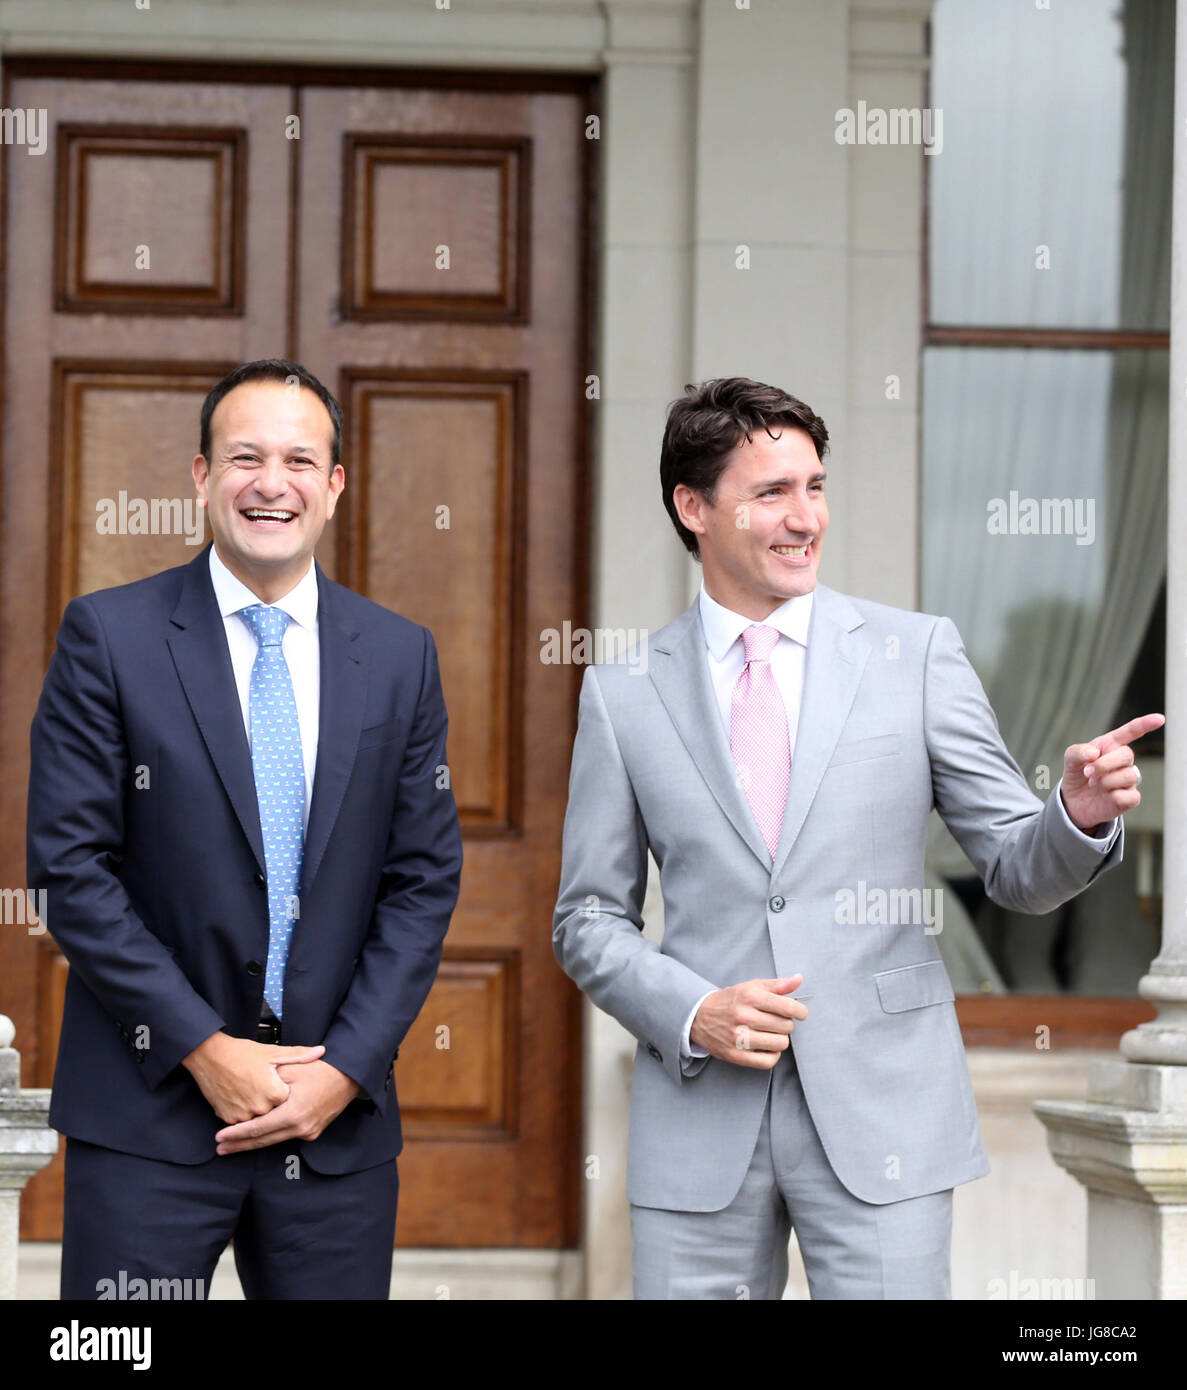 Dublin, Ireland. 4th July, 2017. Justin Trudeau Meets Leo Varadkar in Dublin. The Canadian Prime Minister, Justin Trudeau, today met with Taoiseach and Fine Gael party leader(Prime Minister) Leo Varadkar(left), at Farmleigh House in Dublin. Mr. Trudeau is on a three day visit and is expected to discuss trade between the two countries and the implications of Brexit and a possible hard border, for the Irish economy and its relations with the United Kingdom. Mr Varadkar is Ireland's first gay political leader. Photo: Sam Boal/RollingNews.ie Credit: RollingNews.ie/Alamy Live News Stock Photo